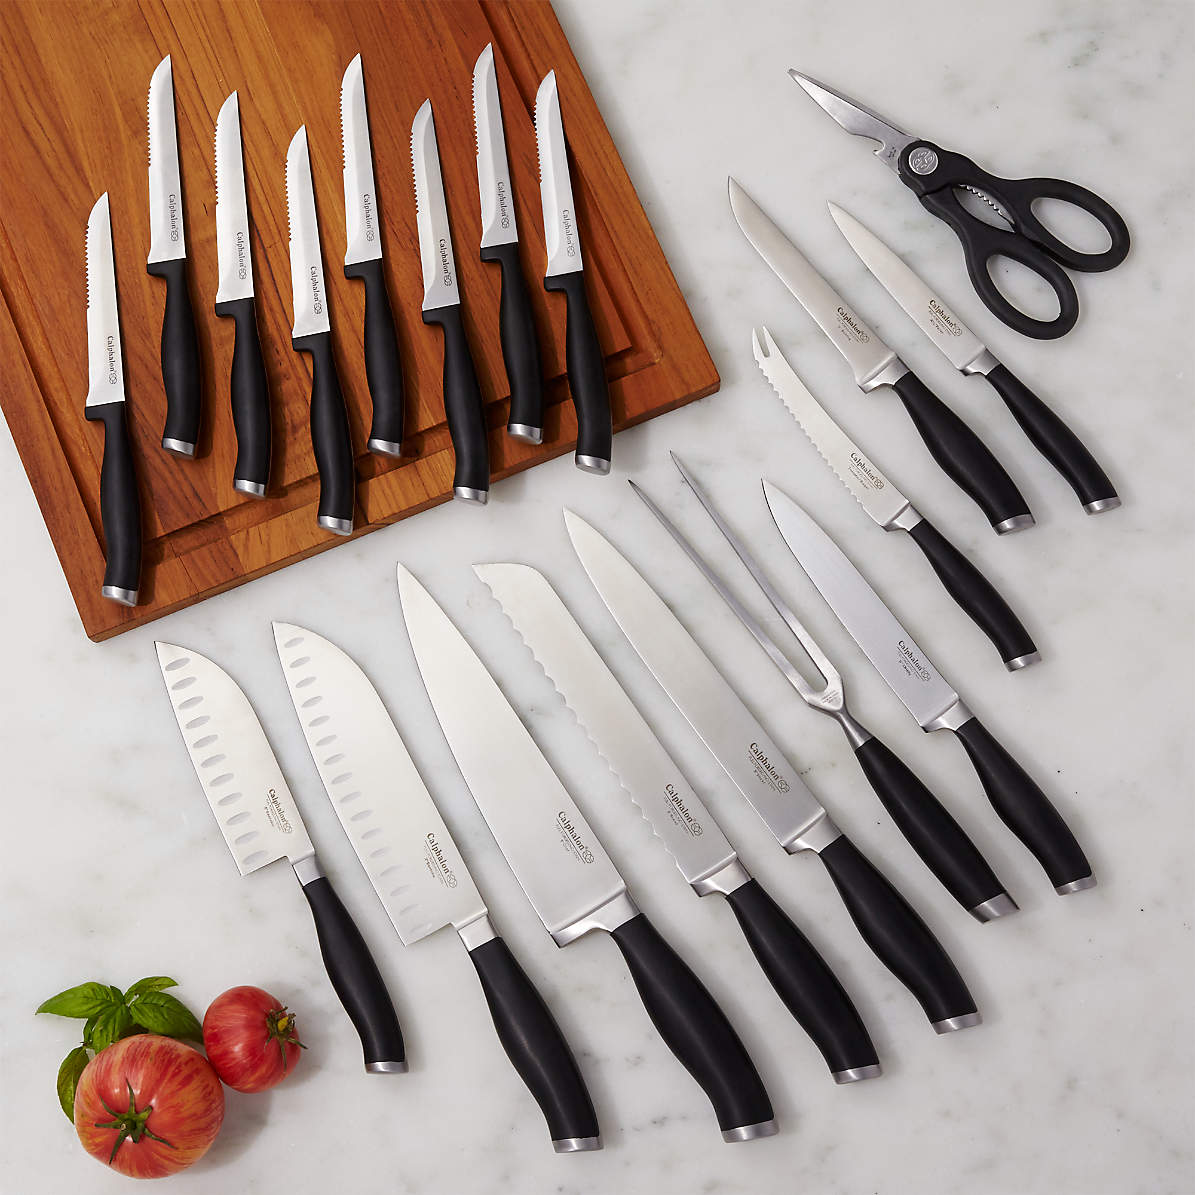 Revealed: All about Calphalon Contemporary Knives